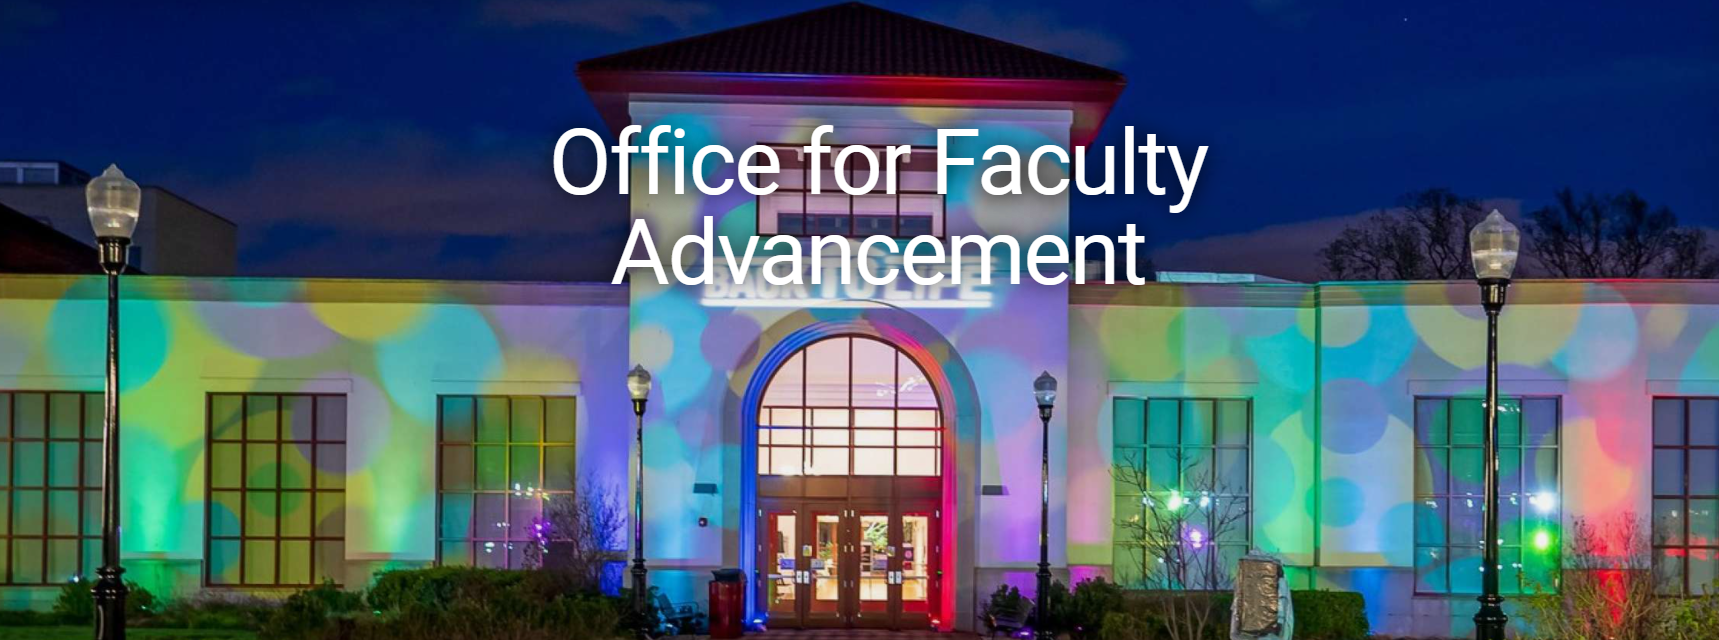 Office for Faculty Advancement